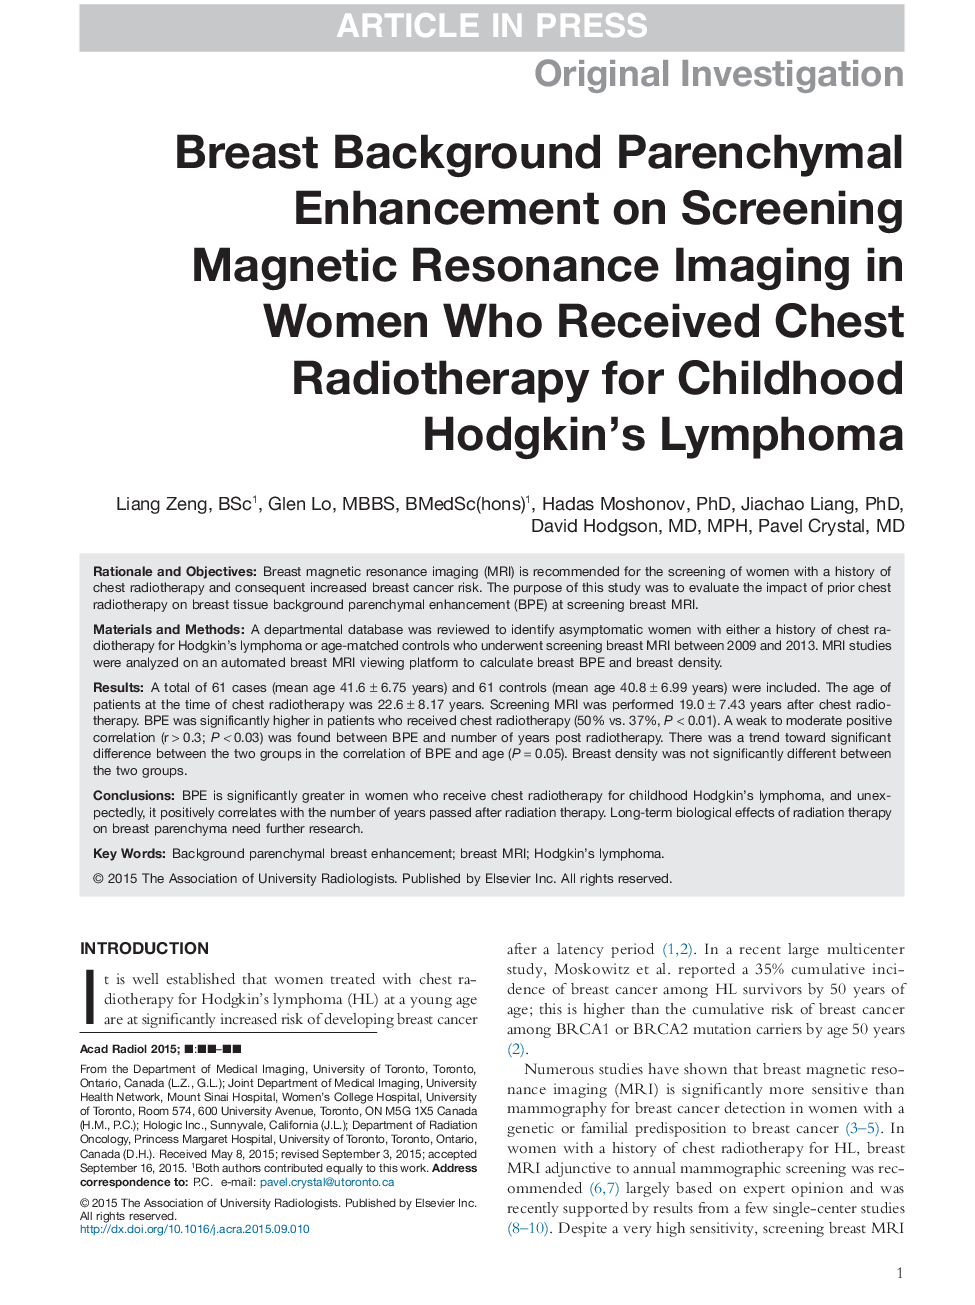 Breast Background Parenchymal Enhancement on Screening Magnetic Resonance Imaging in Women Who Received Chest Radiotherapy for Childhood Hodgkin's Lymphoma